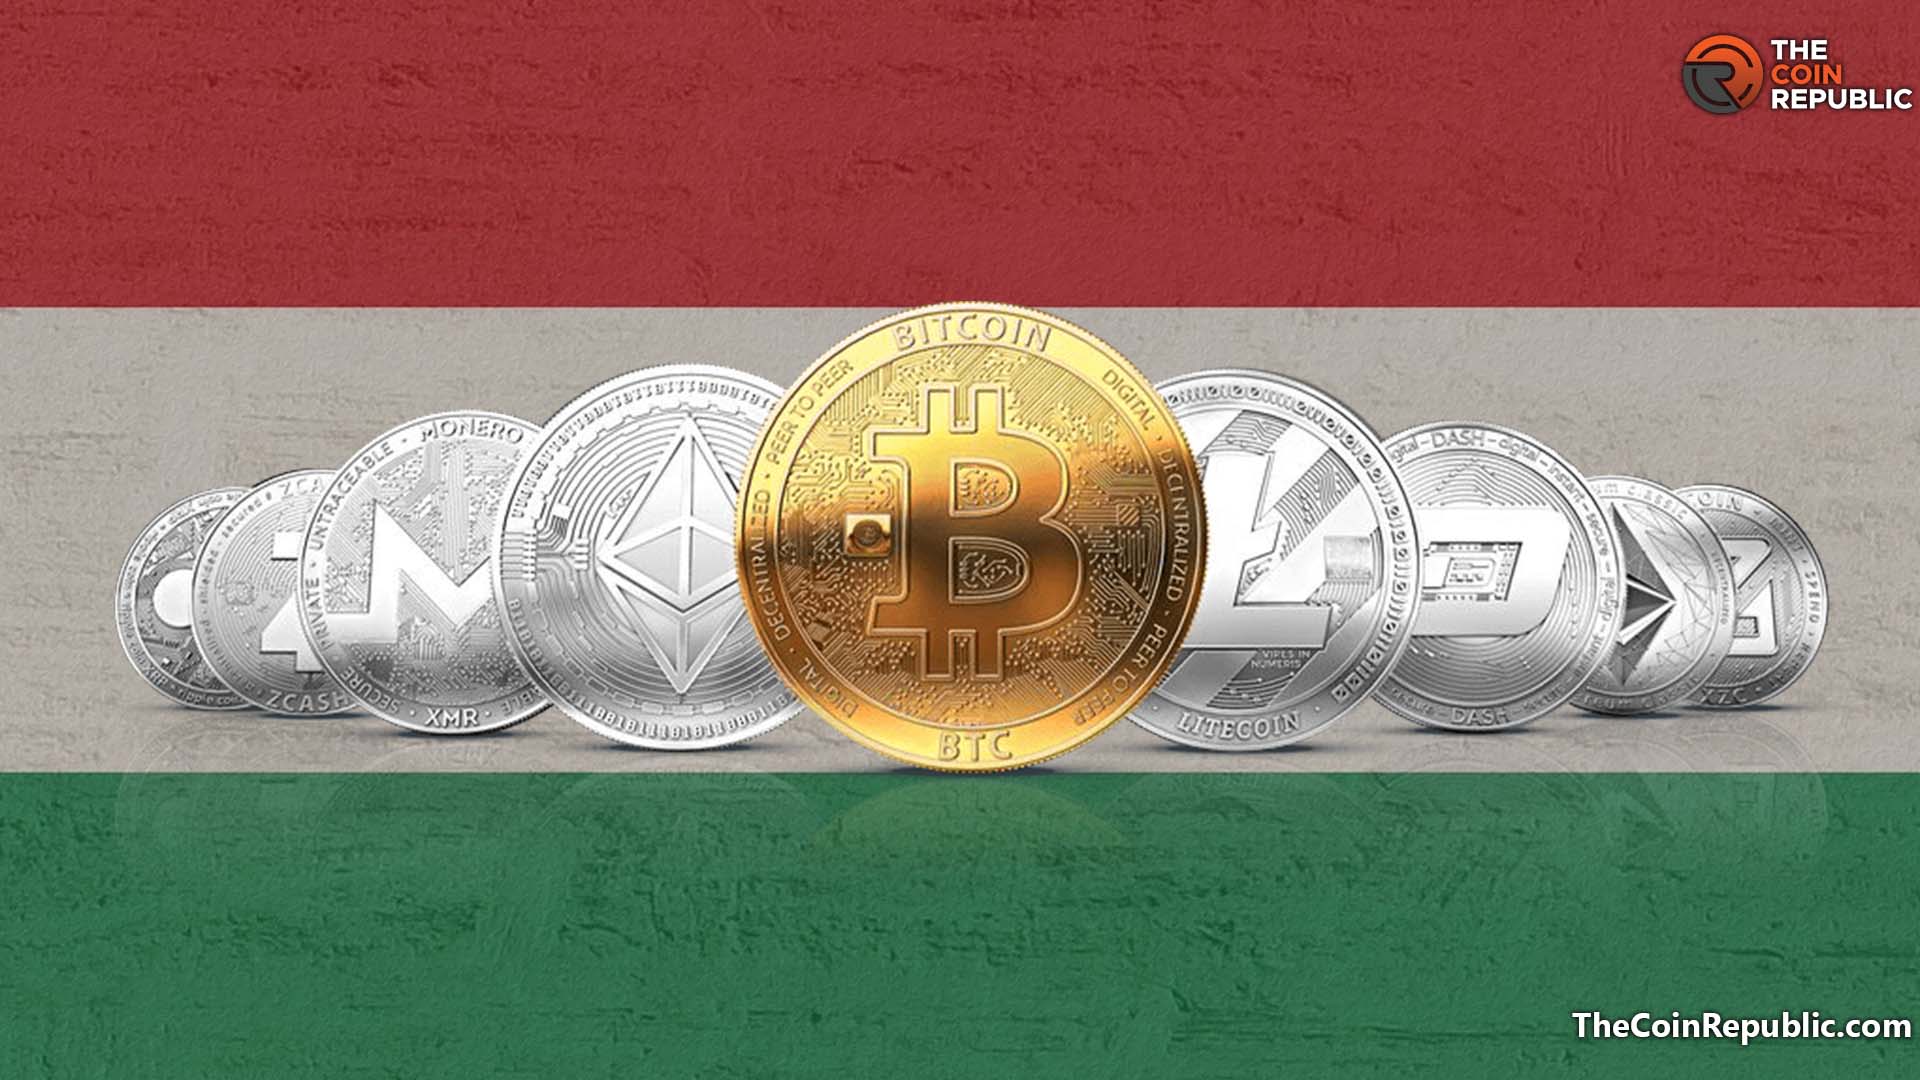 Survey found Hungarians cryptocurrencies are capable investment vehicle